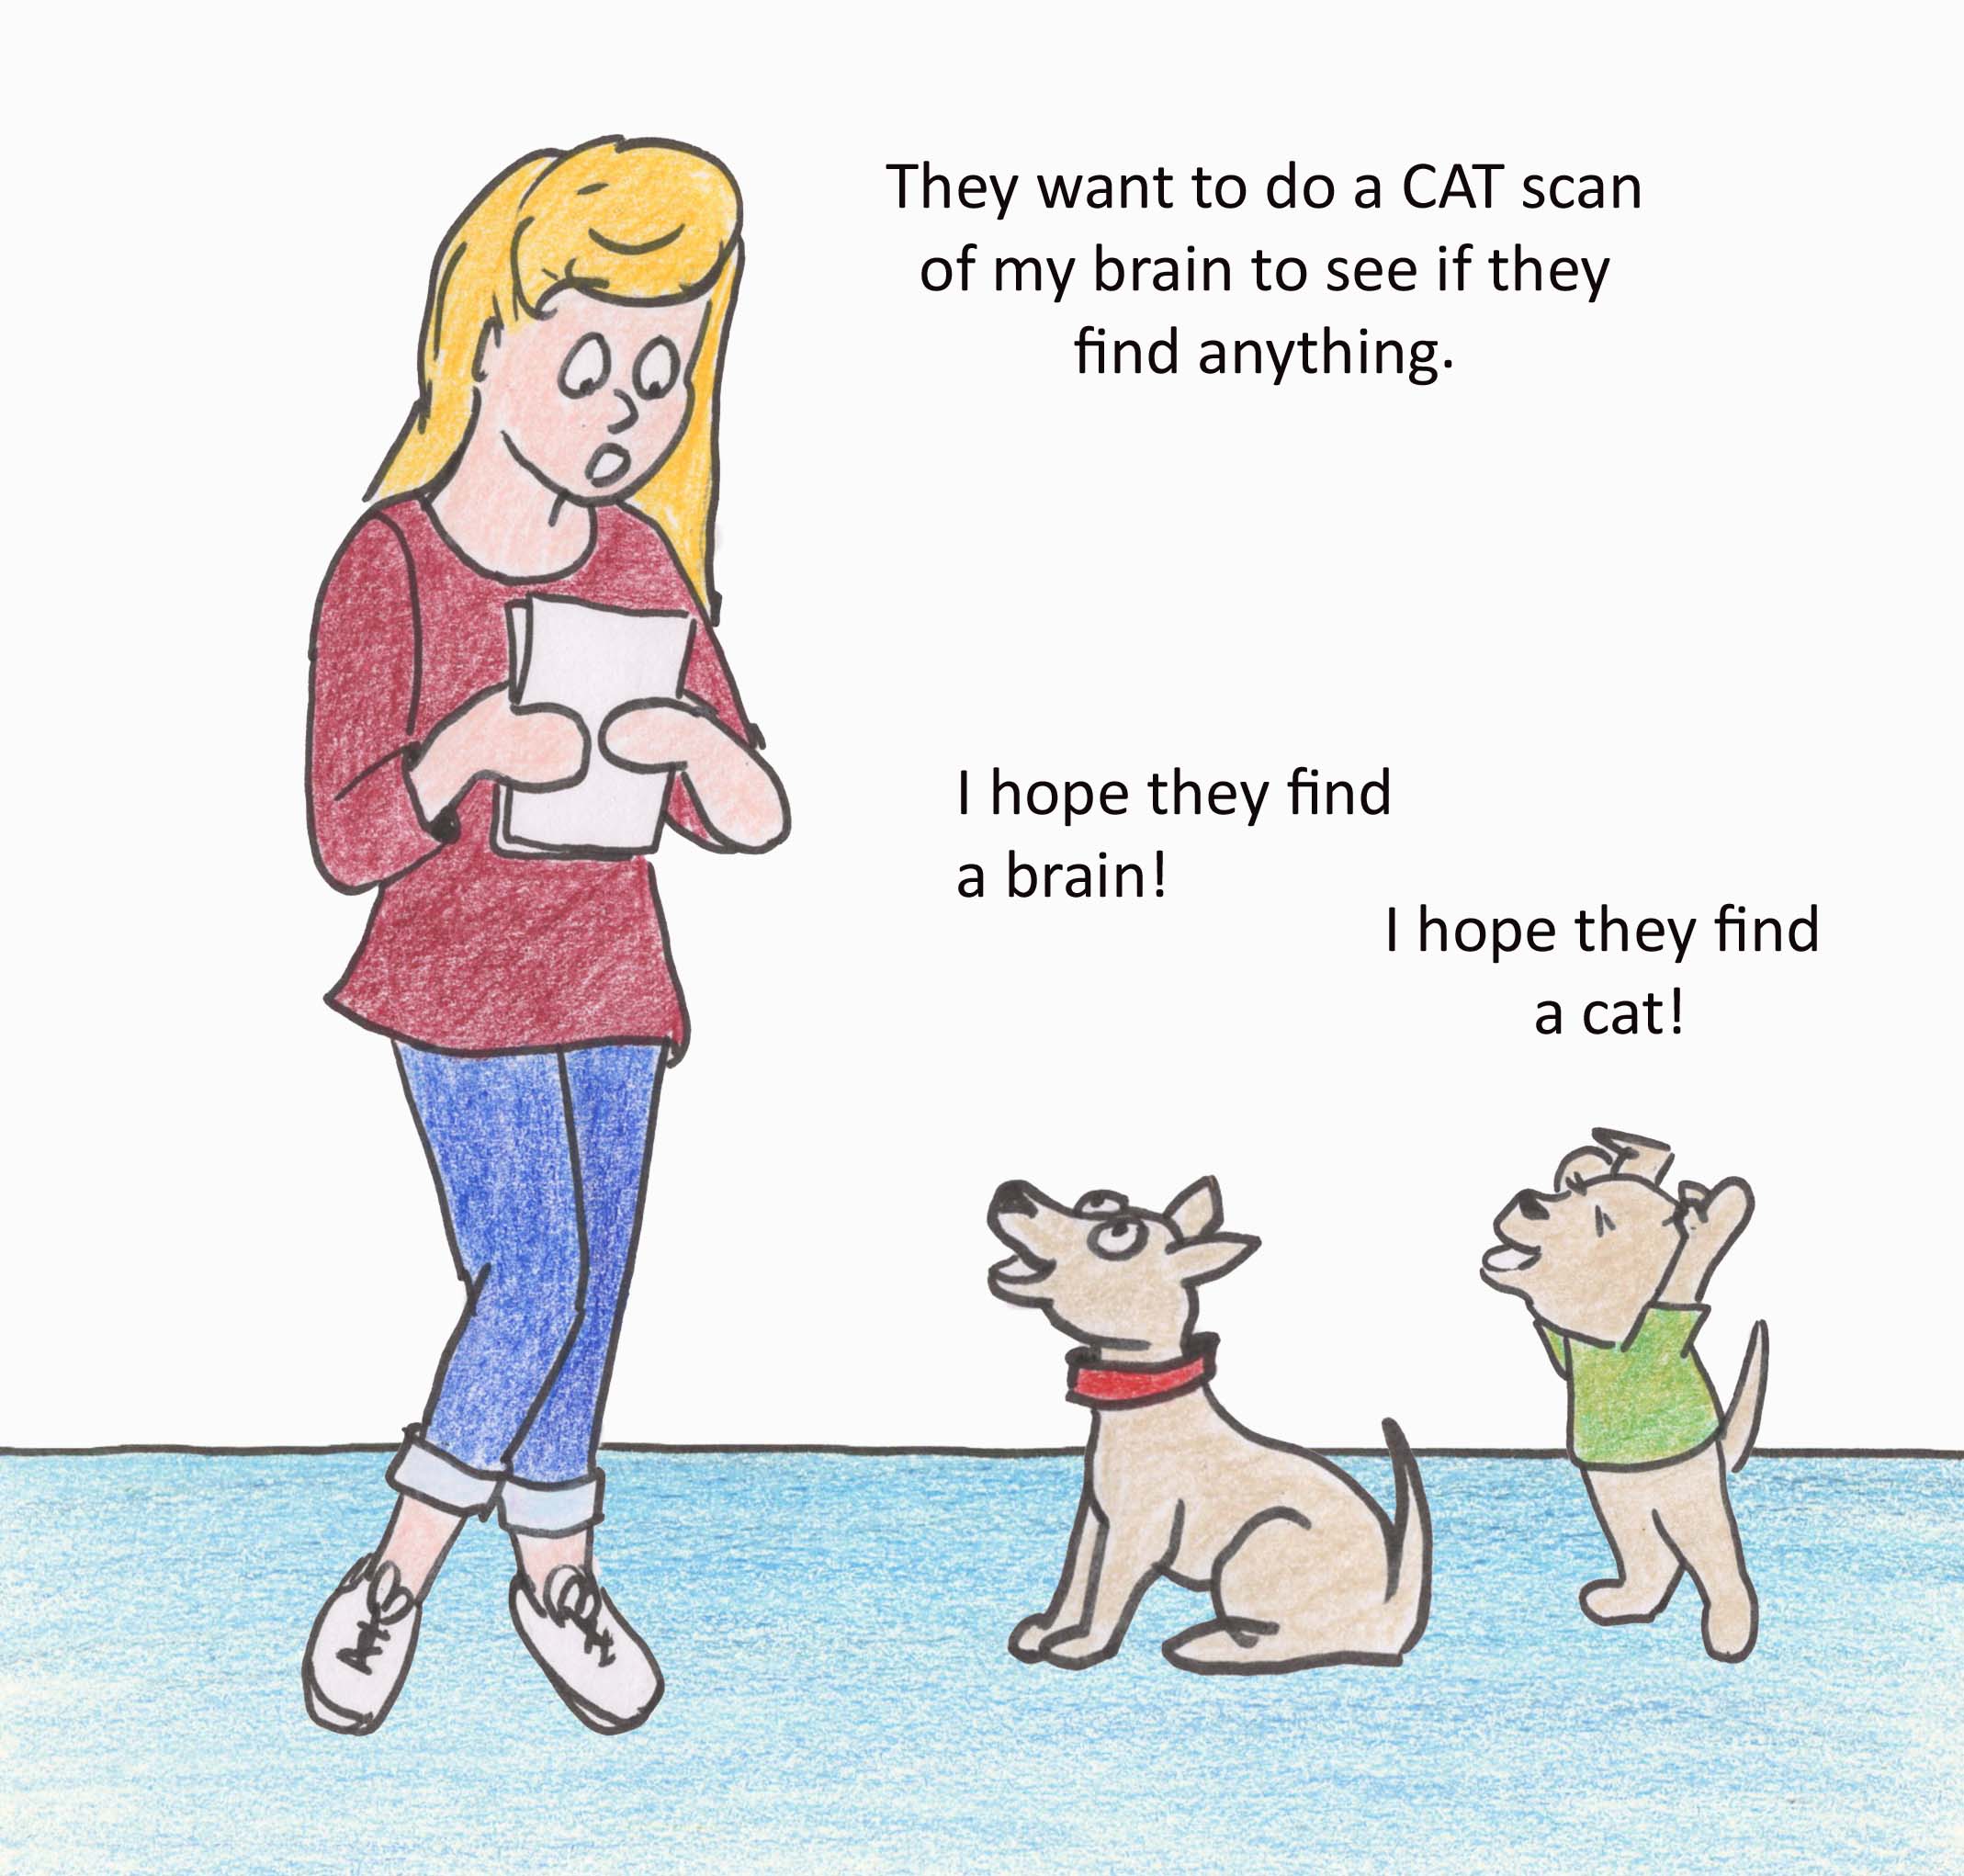 They want to do a CAT scan of my brain to see if they find anything. I hope they find a brain! I hope they find a cat!